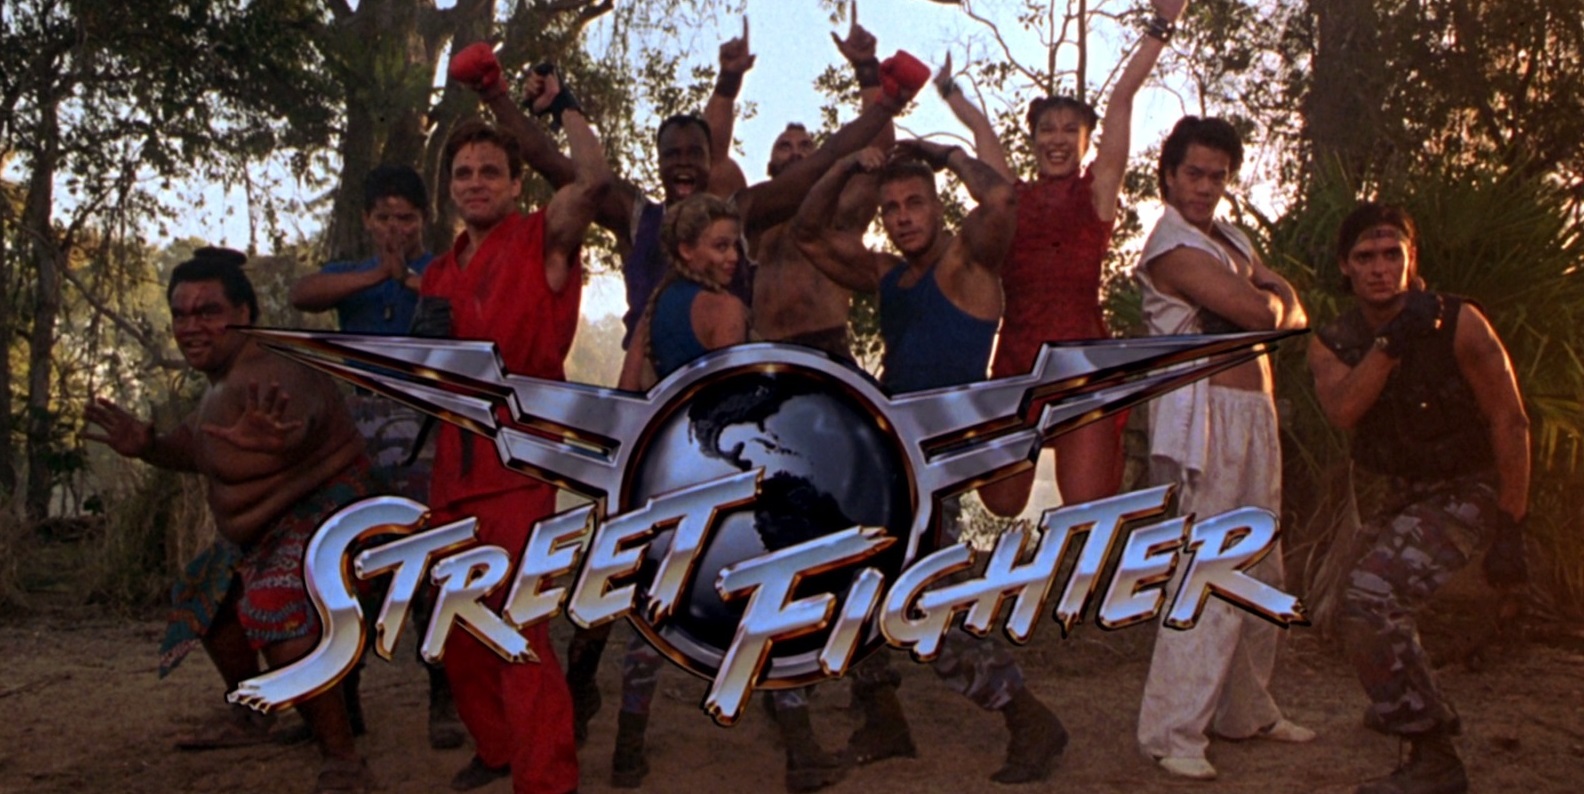 Street Fighter – Adaptacje gier wideo